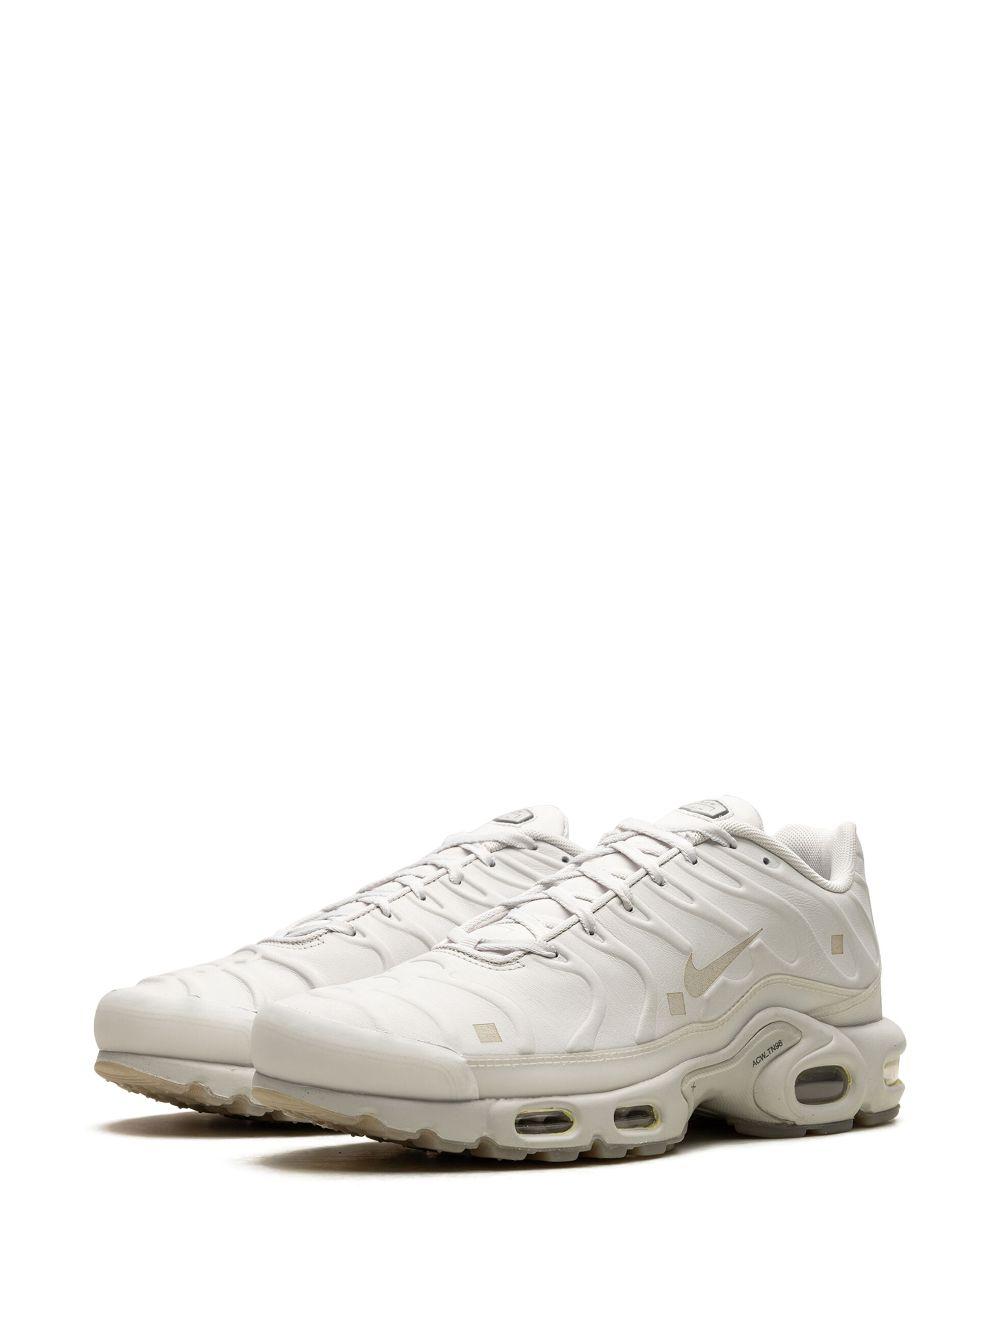 Nike X A-cold-wall* Air Max Plus Sneakers in Gray | Lyst